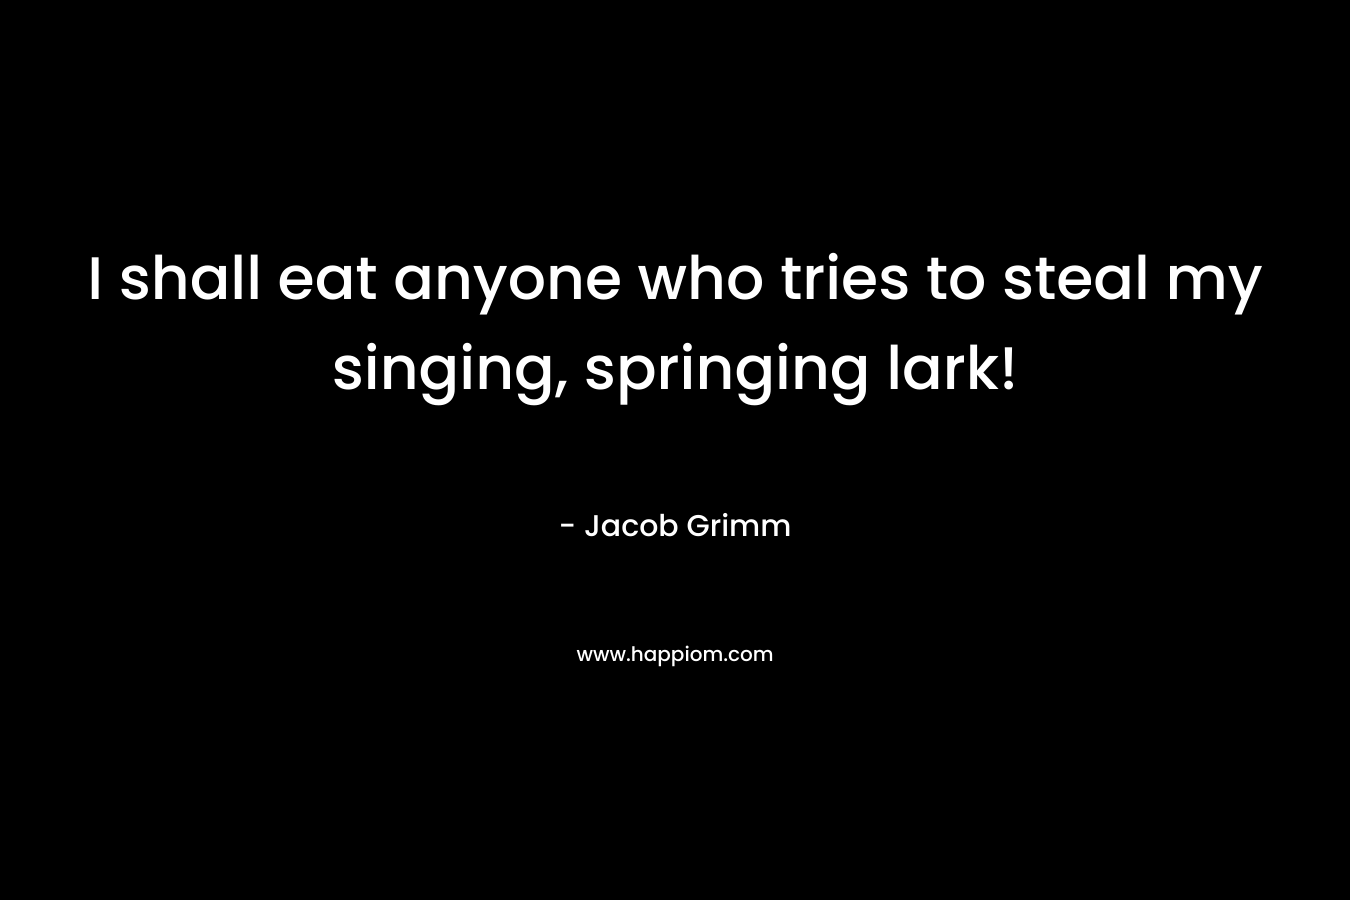 I shall eat anyone who tries to steal my singing, springing lark!